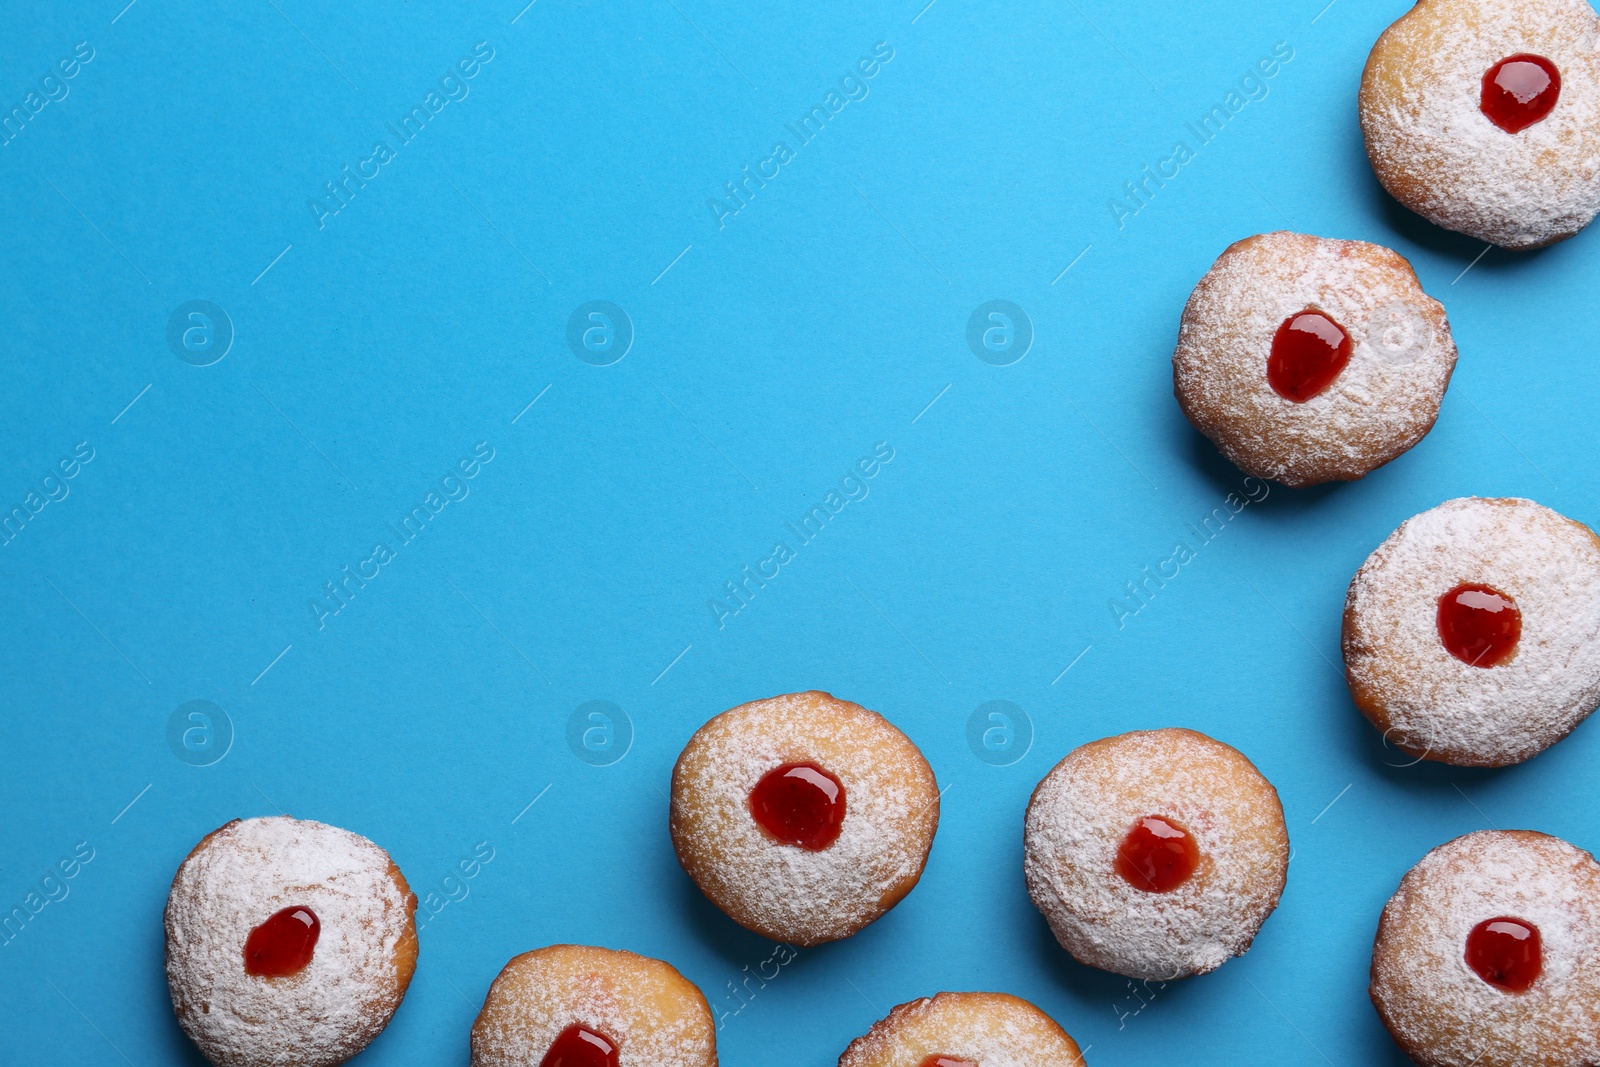 Photo of Hanukkah donuts with jelly and powdered sugar on turquoise background, flat lay. Space for text